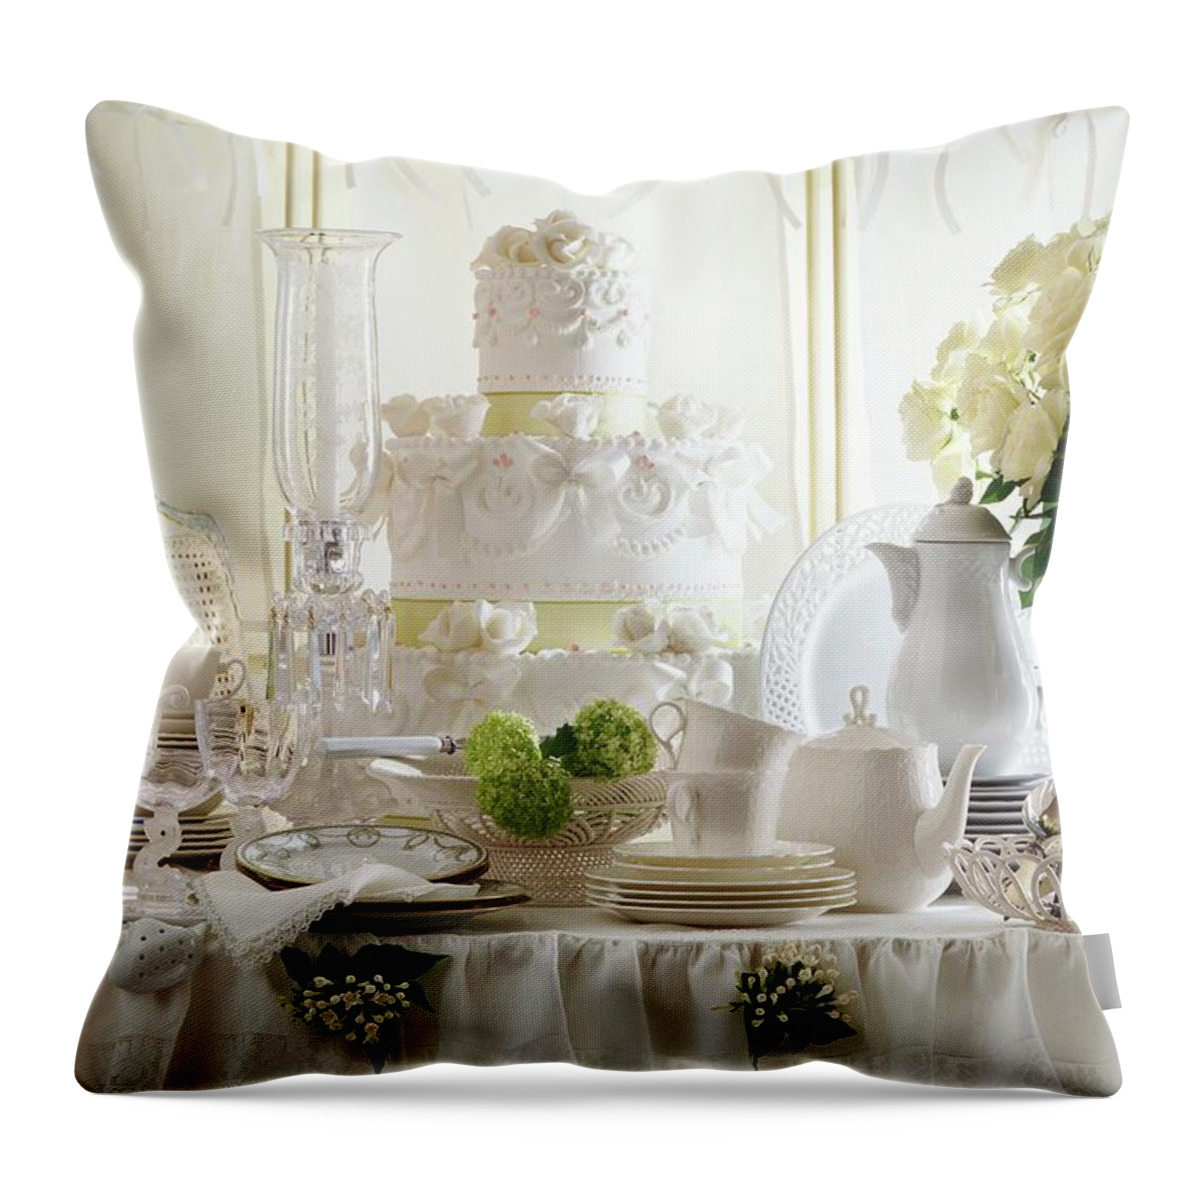 Ip_11297576 Throw Pillow featuring the photograph A Bunch Of White Roses And Artistically Decorated Wedding Cake On A Table by Laura Rizzi